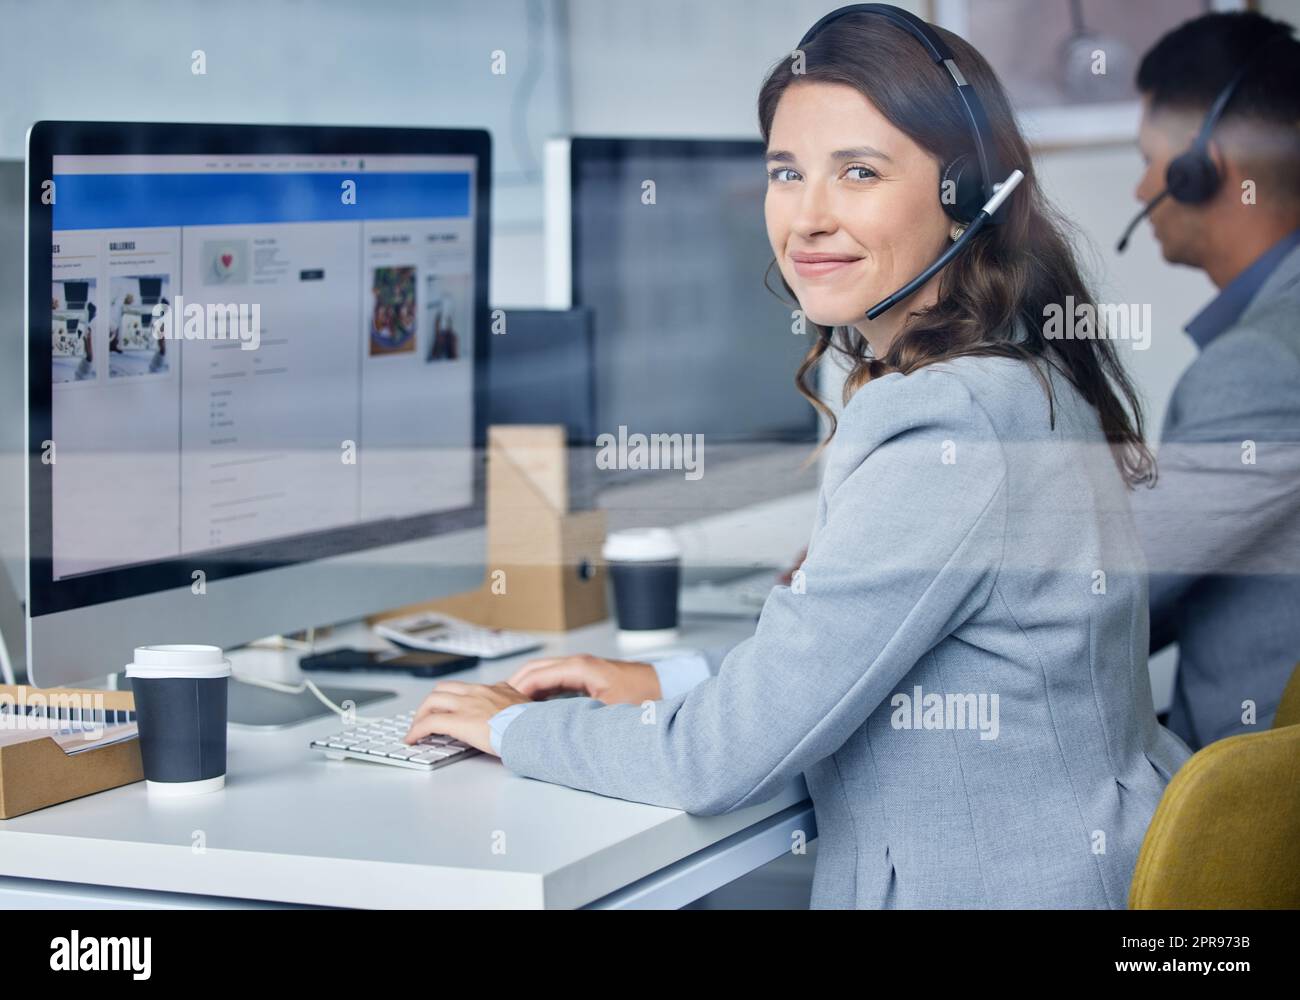 There will always be customers to help. Cropped portrait of an attractive young female call center agent working at her desk. Stock Photo